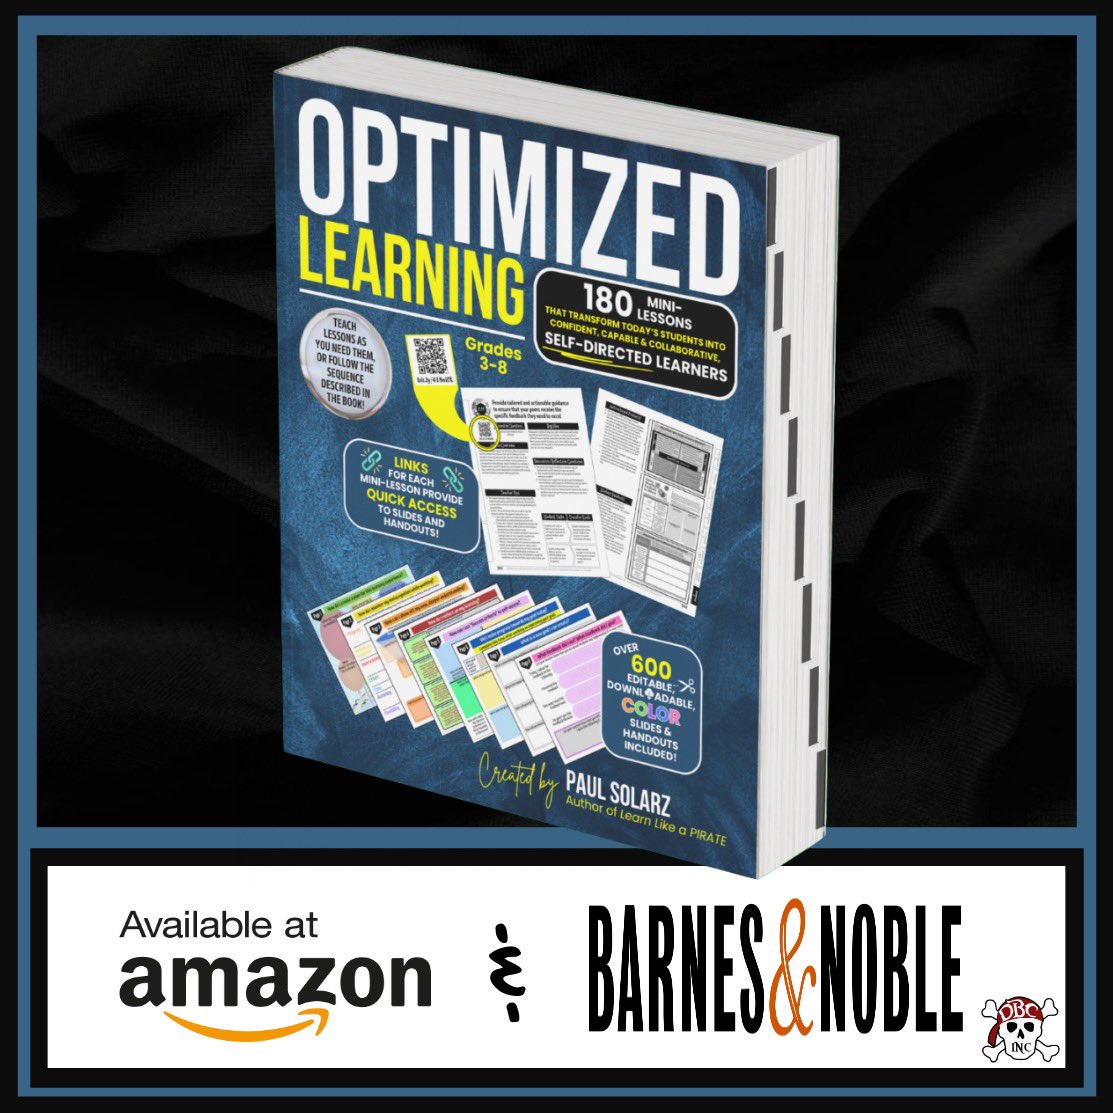 Congratulations to @PaulSolarz on the publication of #OptimizedLearning on his brand new @EduPioneersDBC imprint of #dbcincbooks!!
Learn more about @OptLearn here:
a.co/d/5CaGNY3
180 Mini-Lessons!!! MASSIVE & Powerful project! 
#LearnLAP #tlap